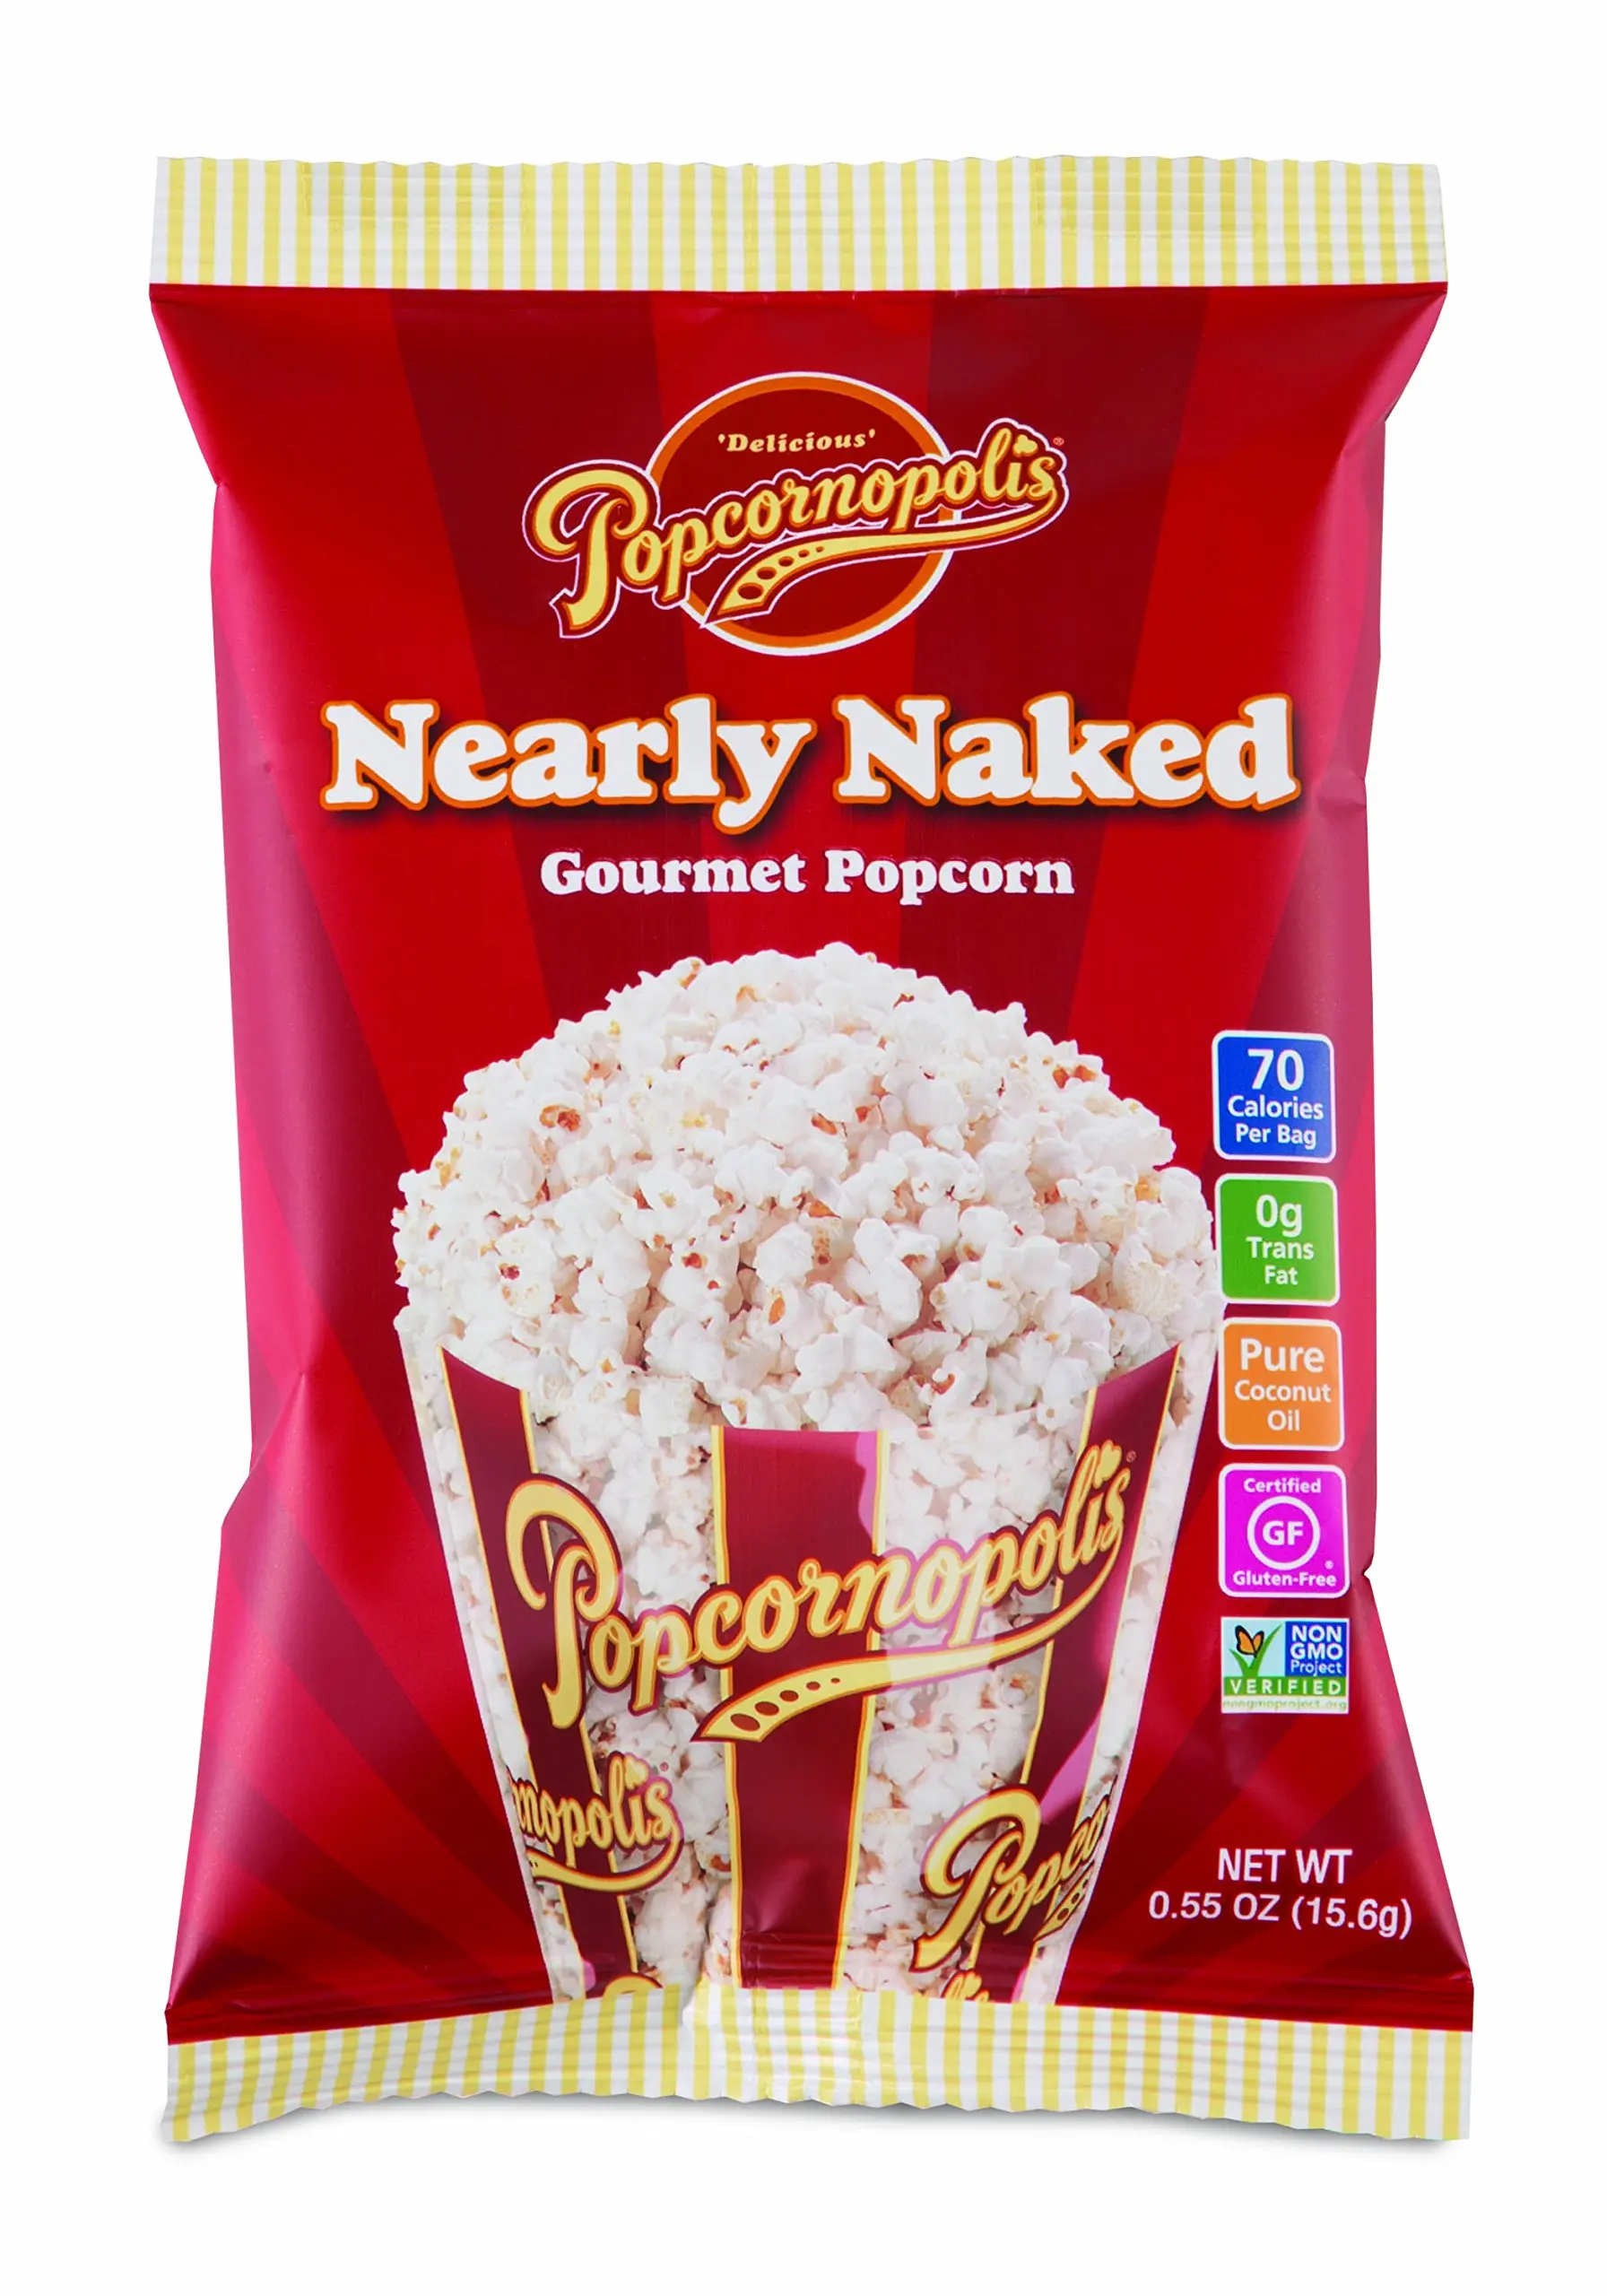 Popcornopolis Gourmet Popcorn Snack Bags (pack of 24) (Nearly Naked 0.55oz)...